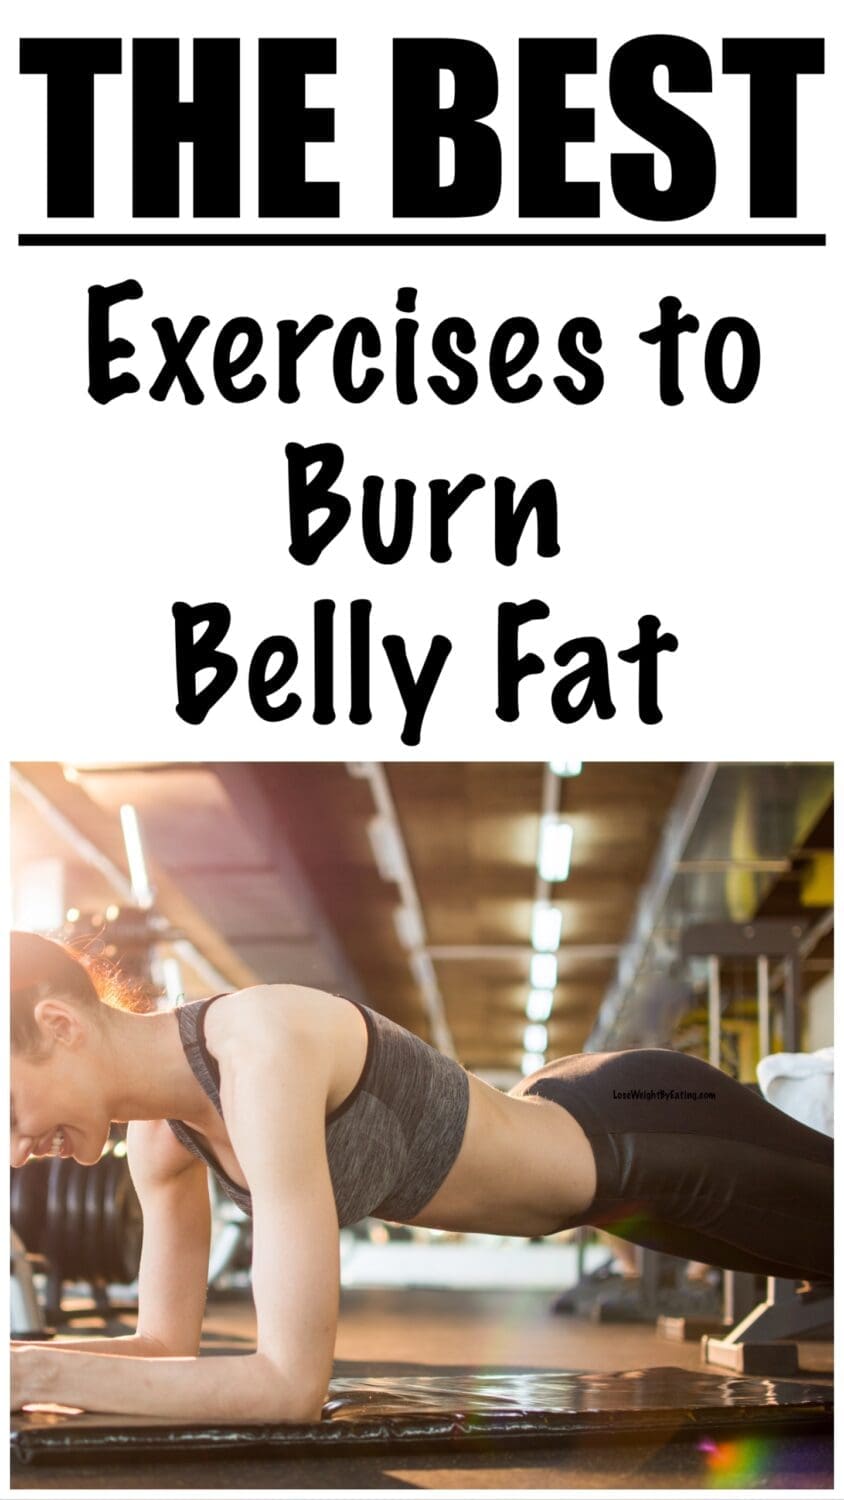 10 Best Exercises to Burn Belly Fat